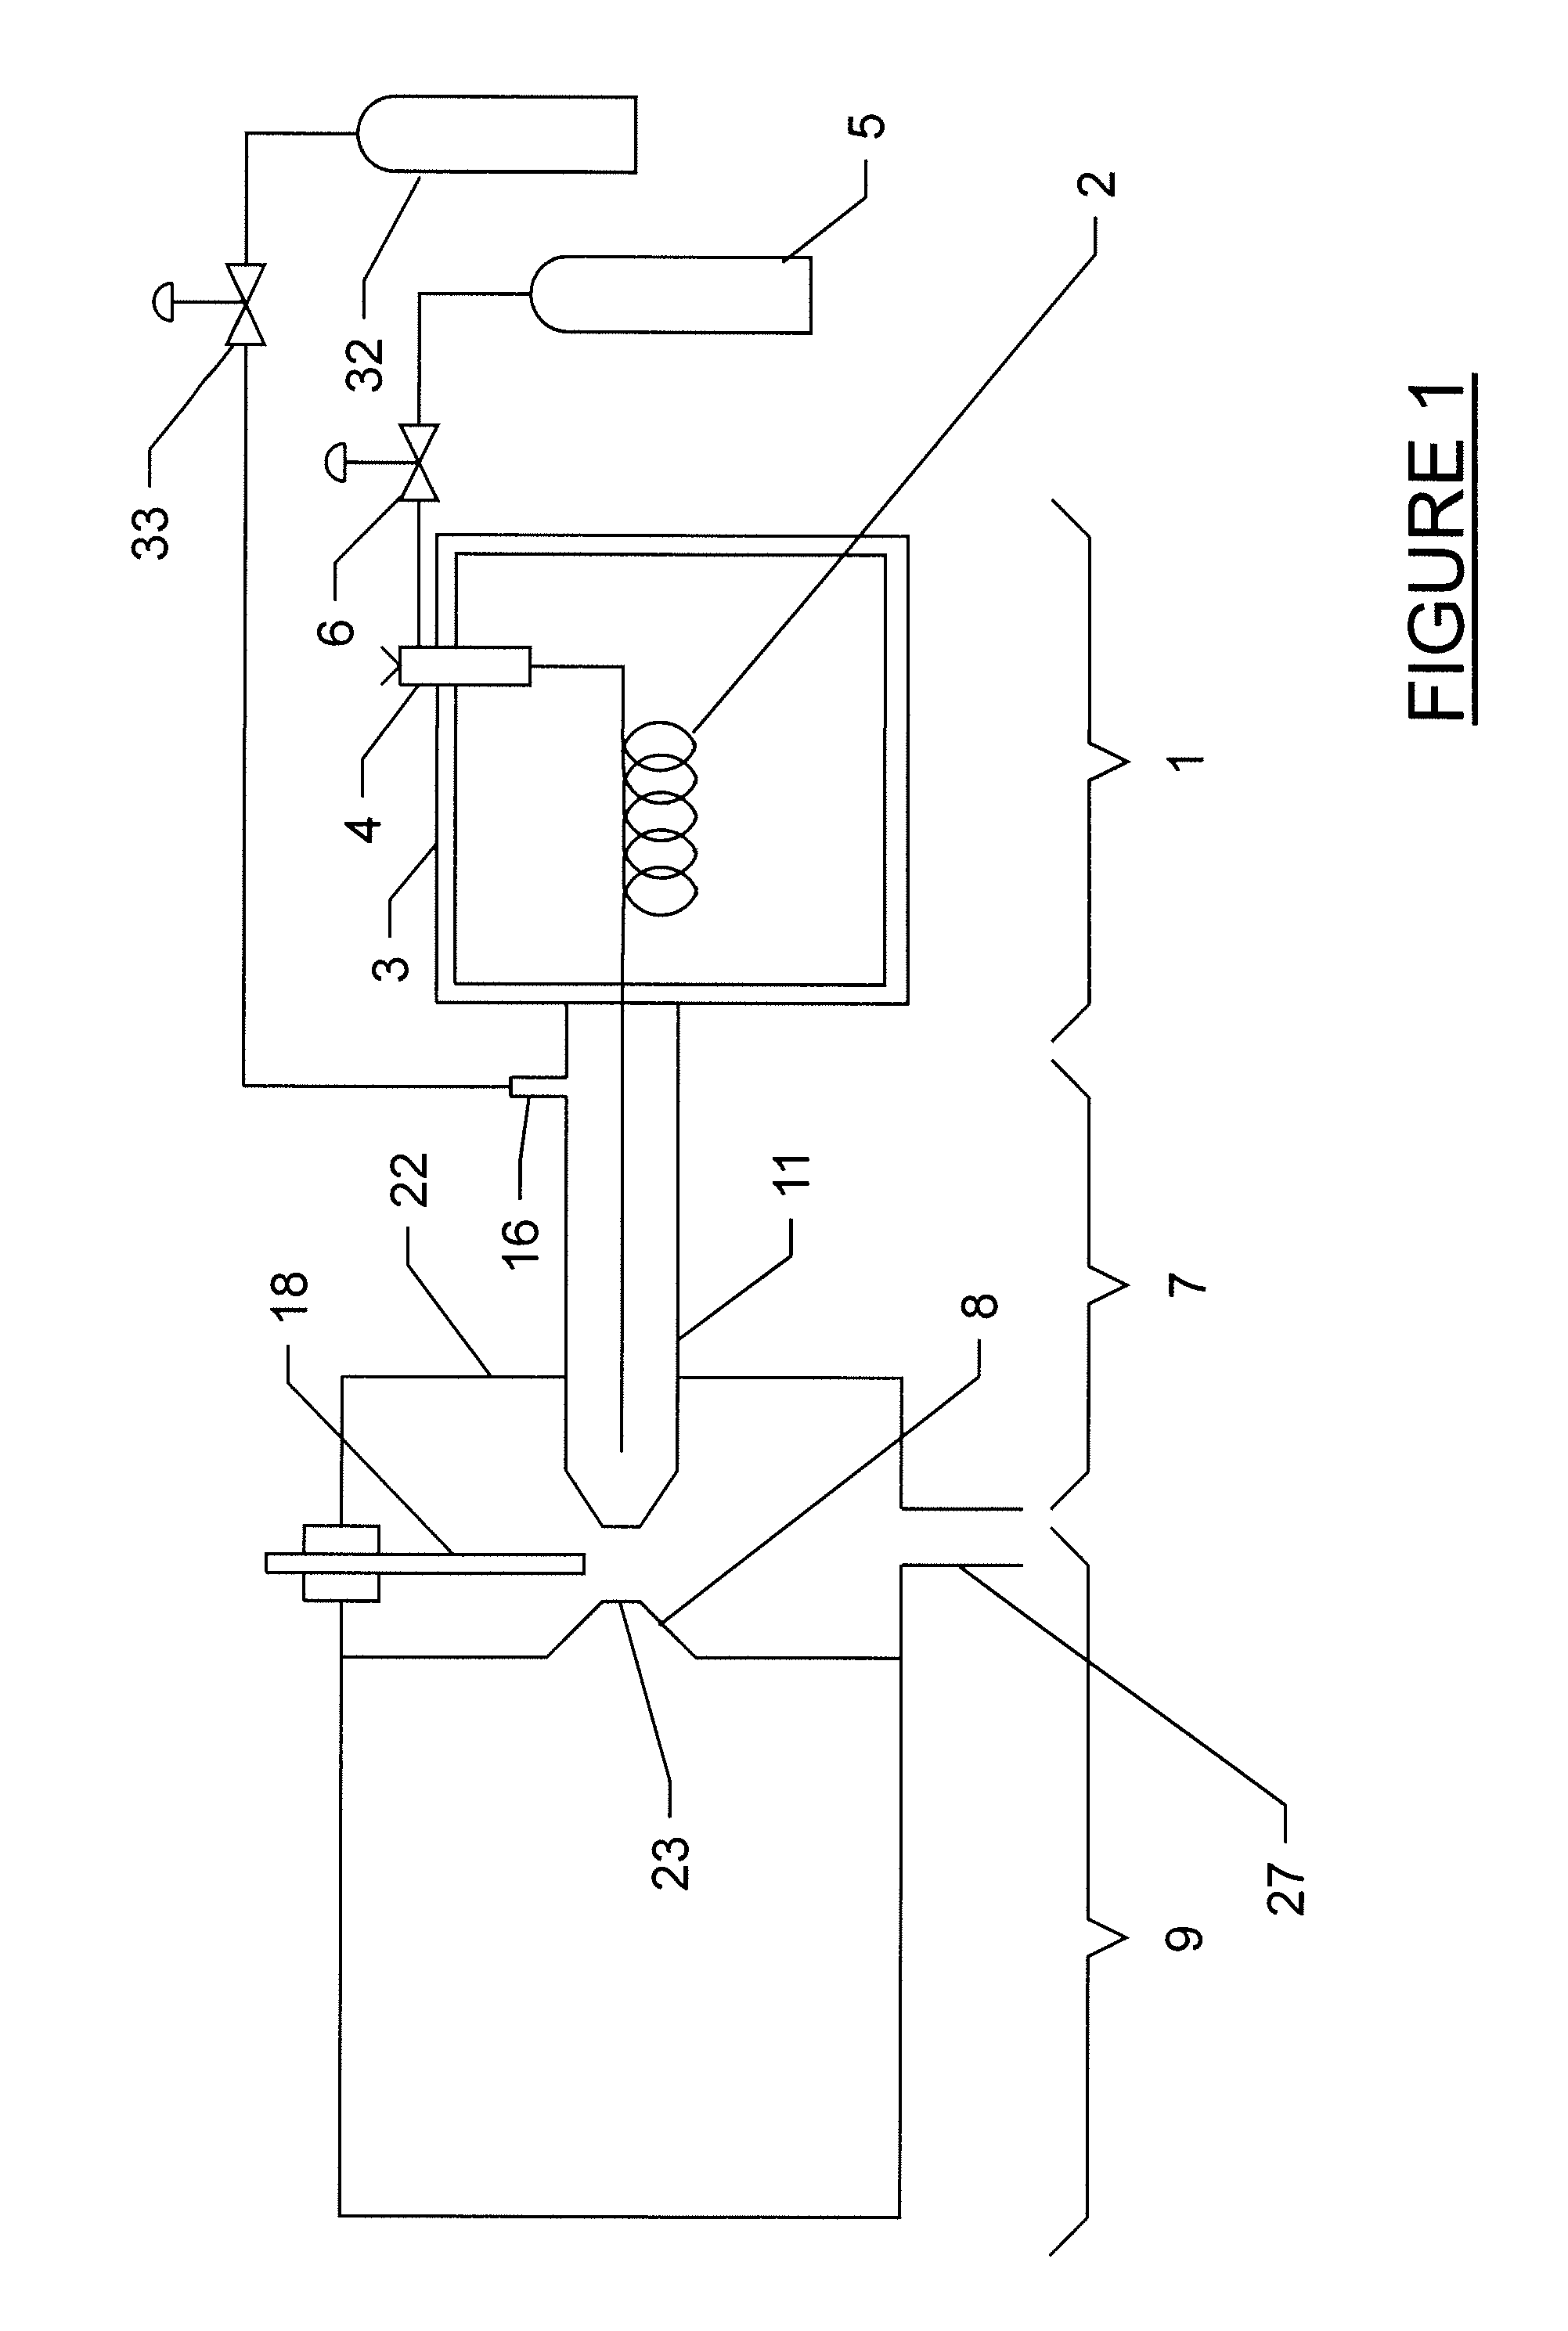 Apparatus And Methods For Gas Chromatography - Mass Spectrometry